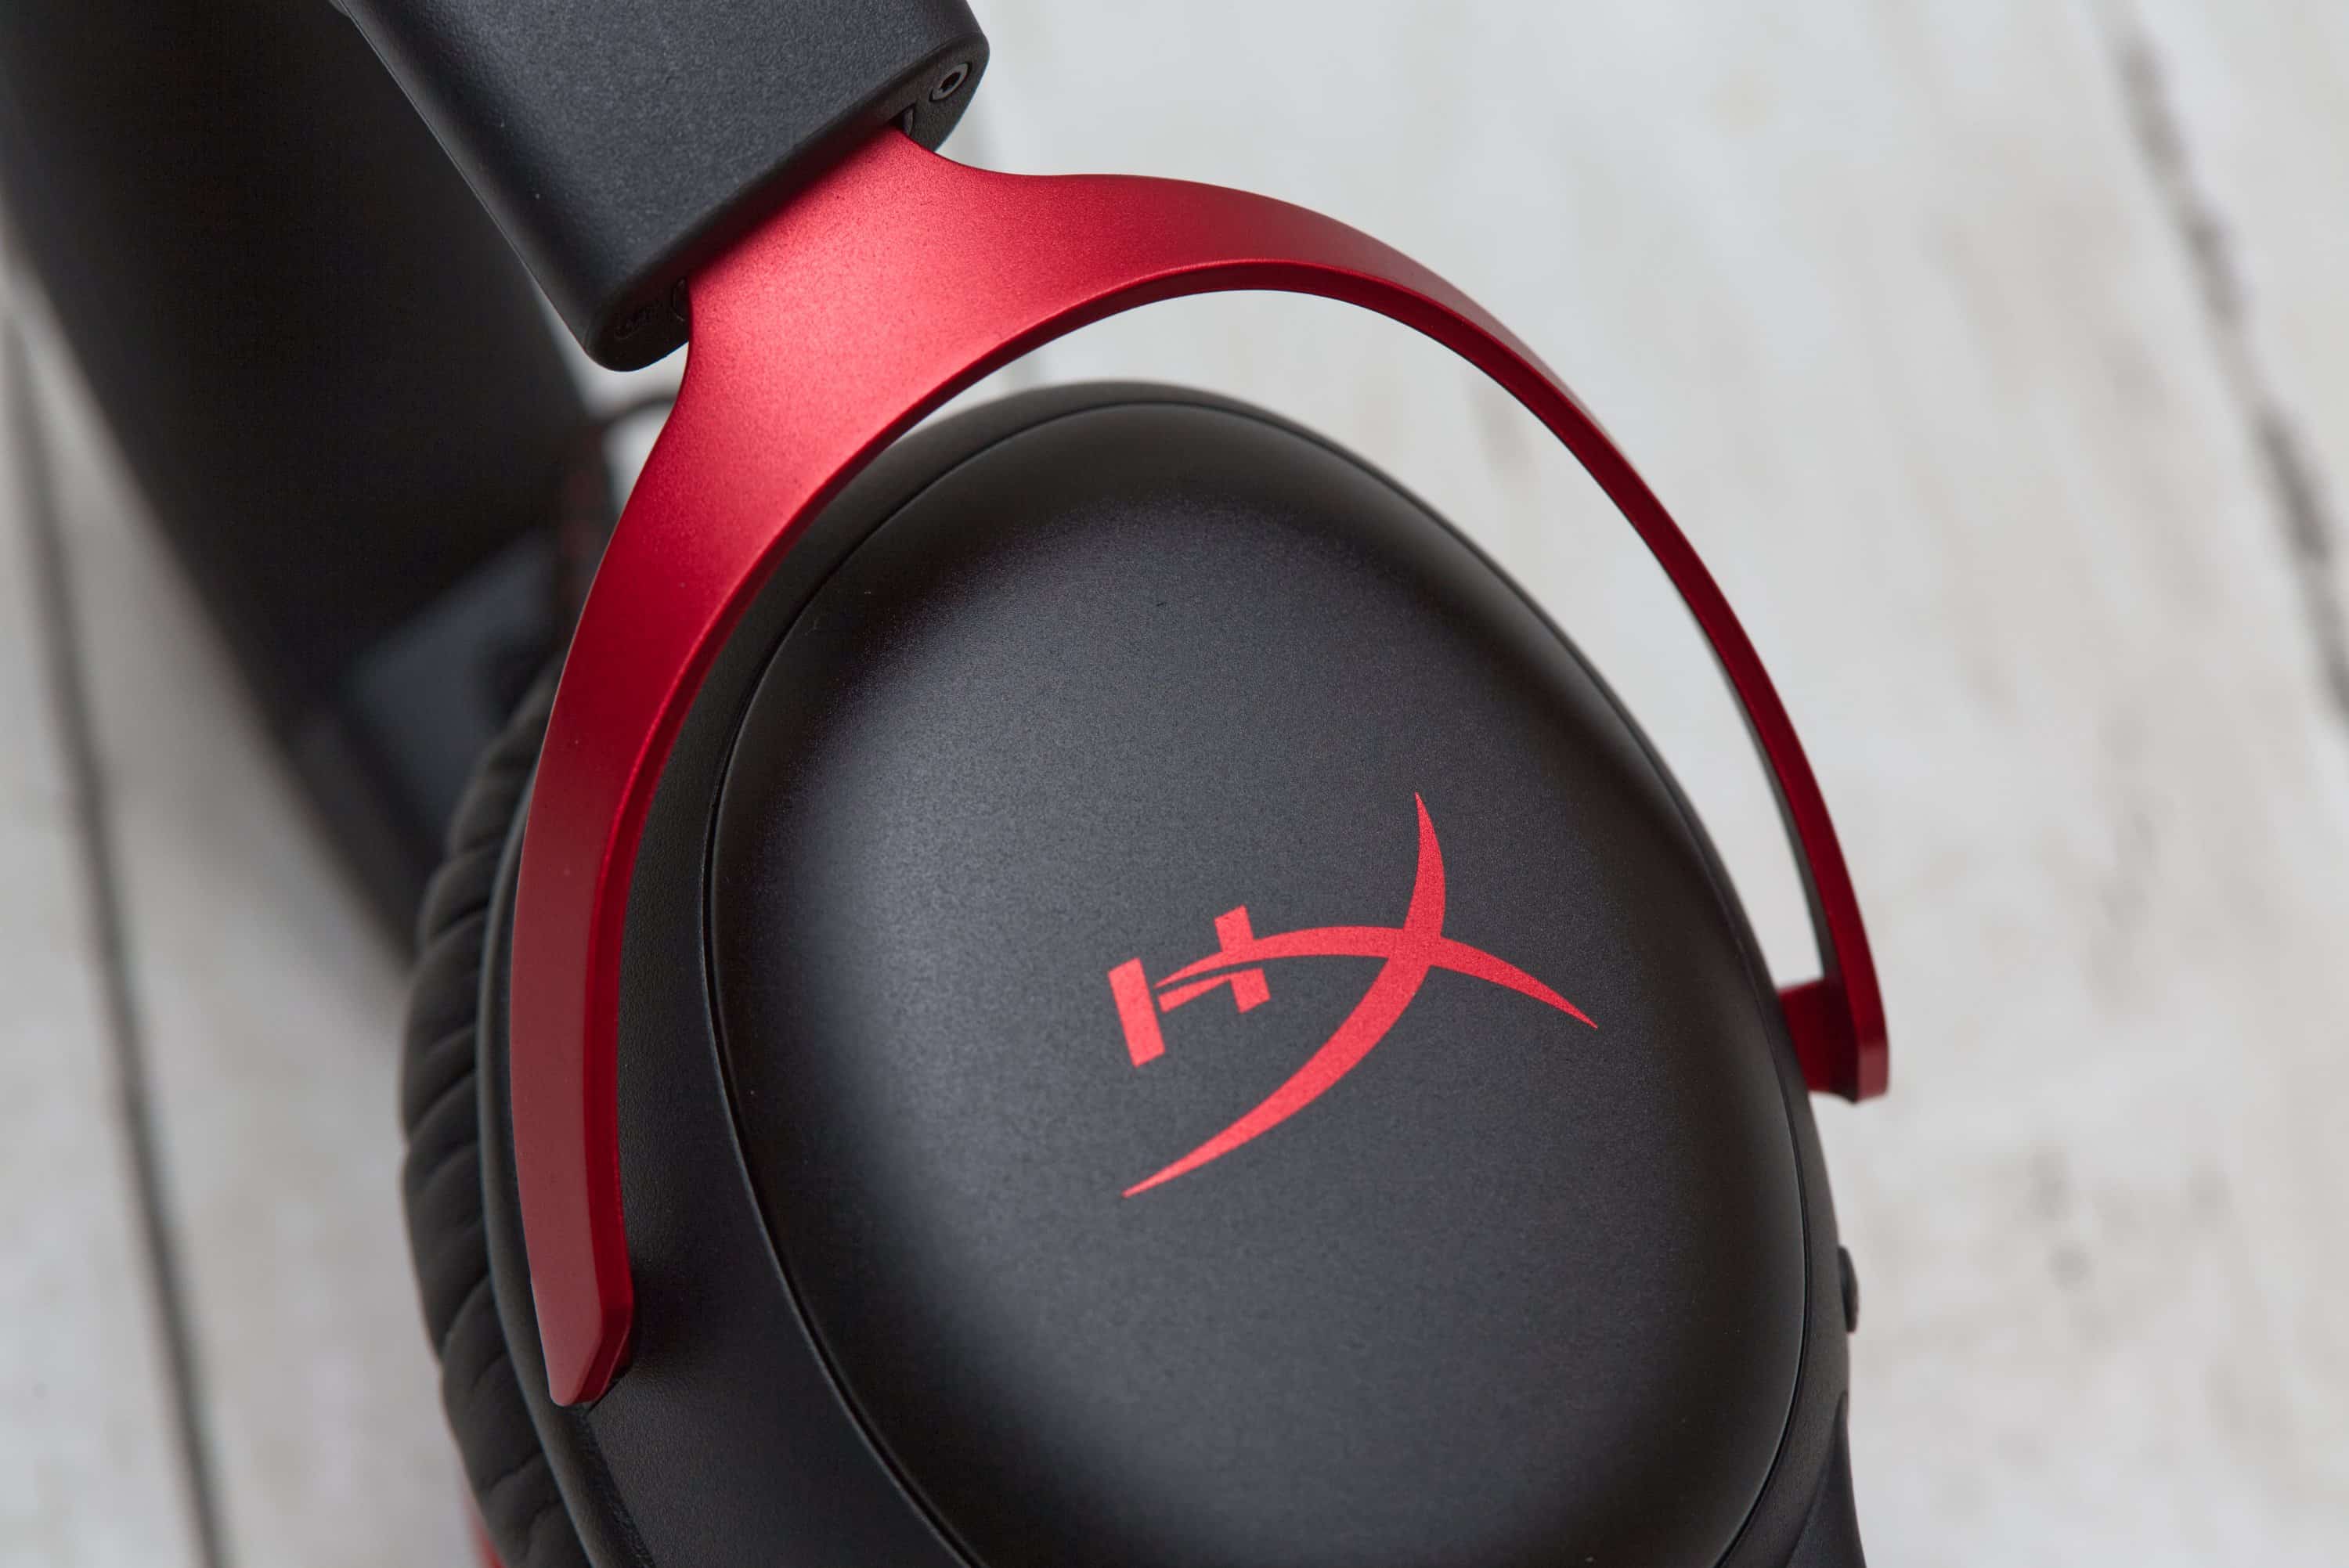 HyperX Cloud III review next generation - headsets of the gaming